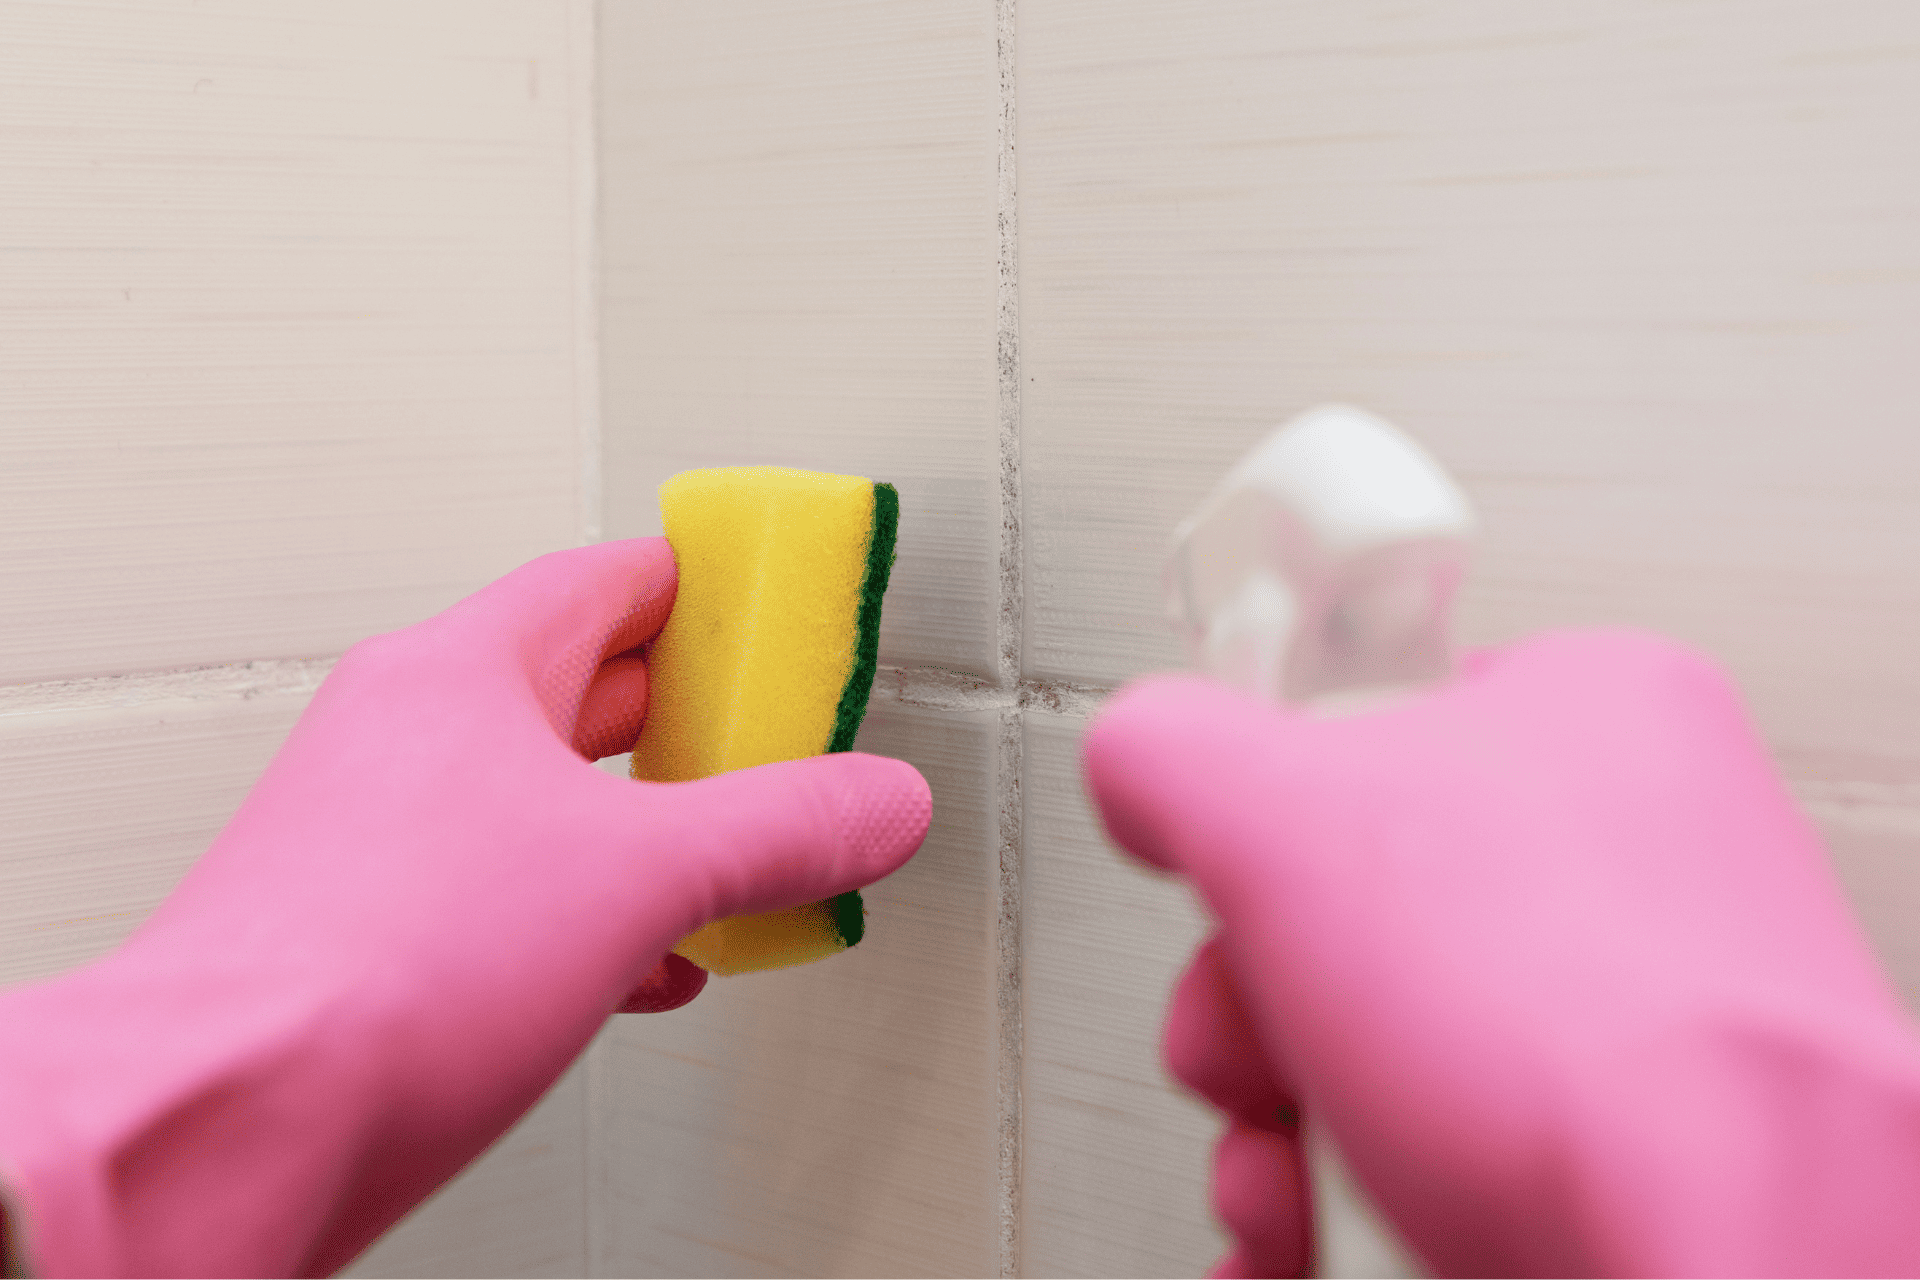  Gloved hands scrubbing mould off a bathroom wall